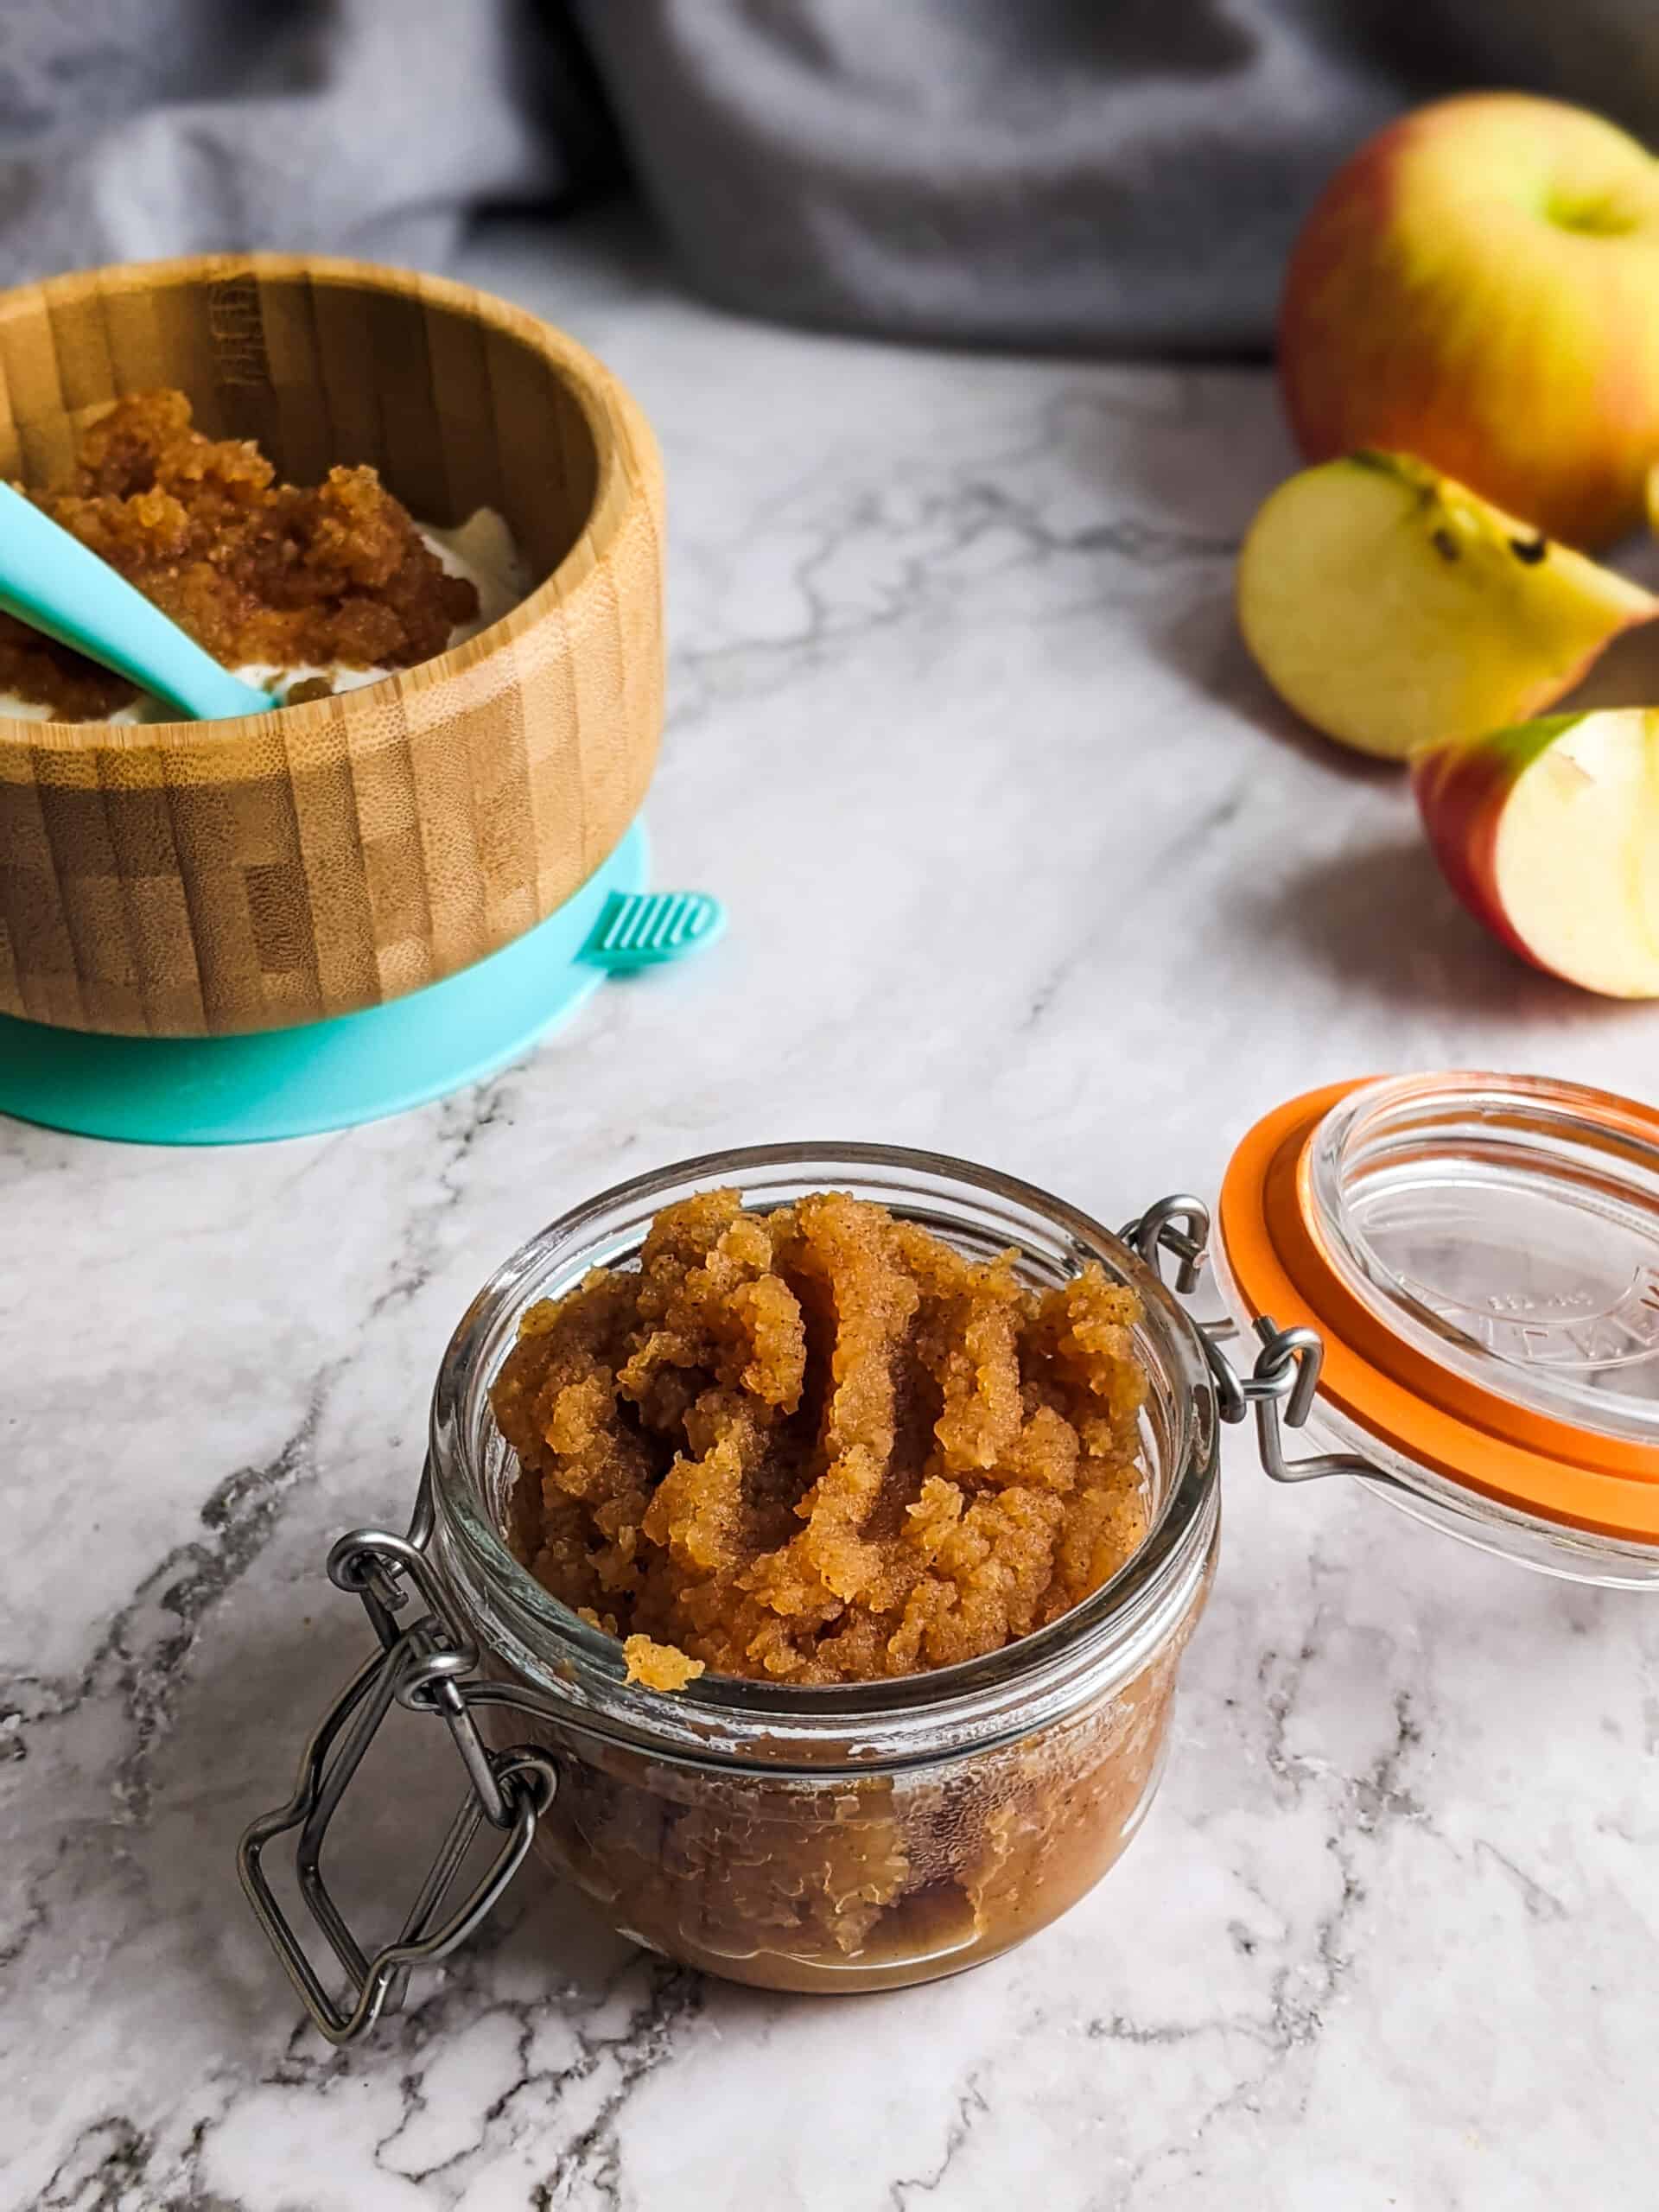 Homemade sugar-free applesauce in a jar with apples in a background and a bowl with yogurt and applesauce.